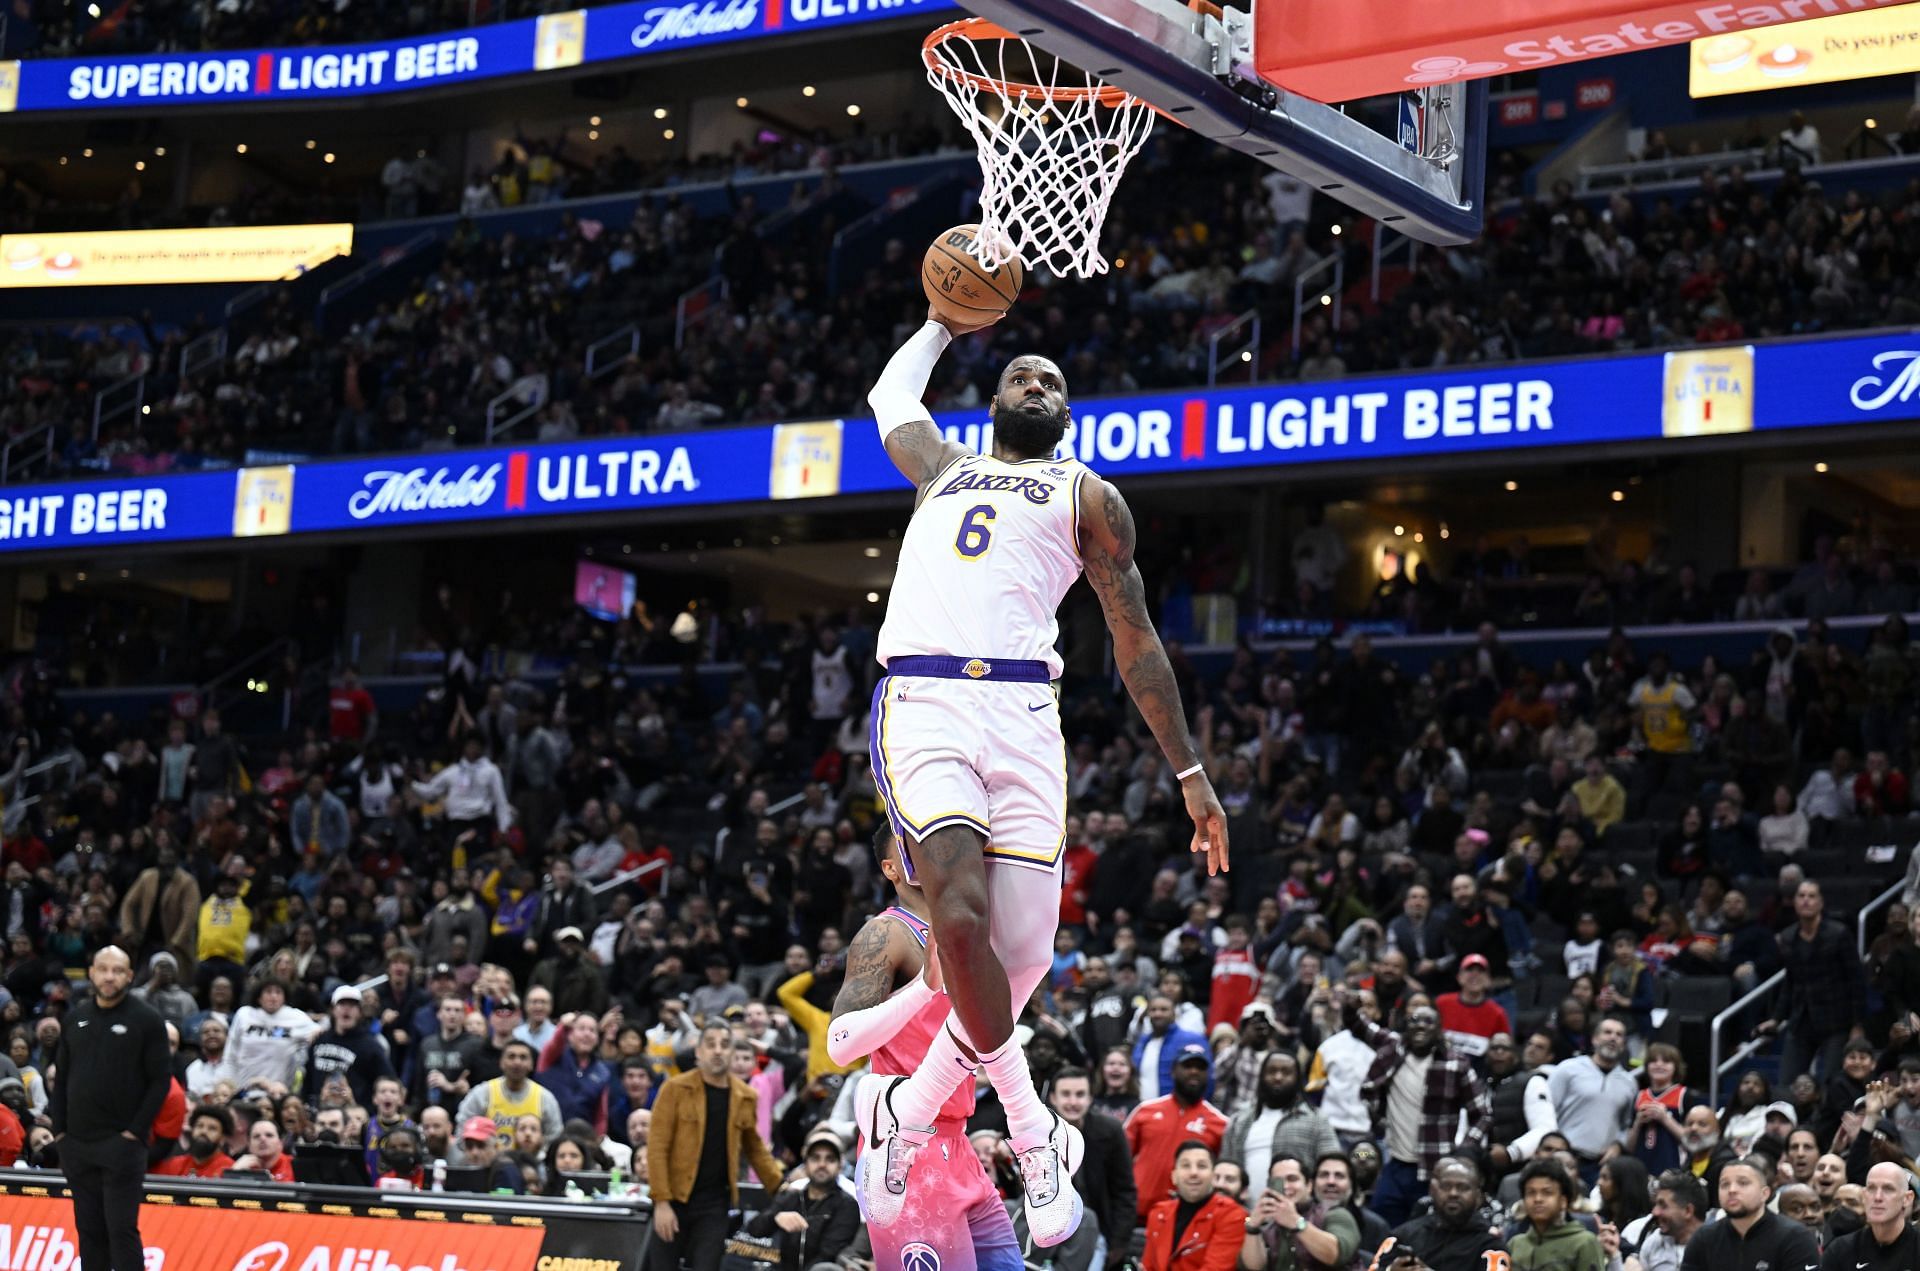 LeBron James of the Los Angeles Lakers dunks the ball